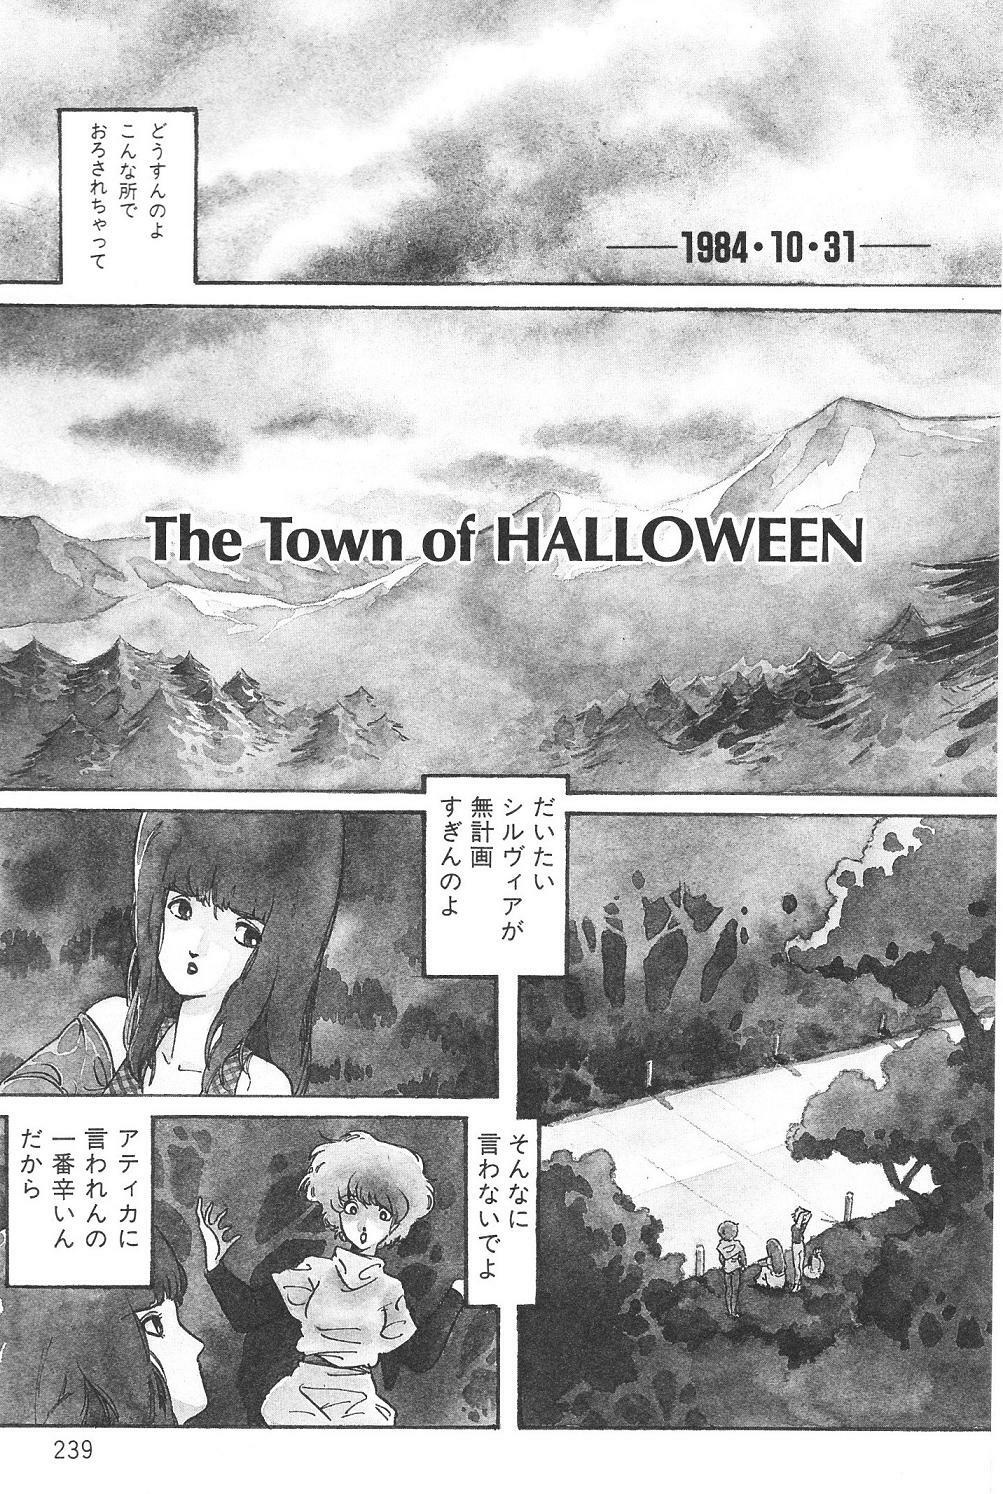 Aran-Rei THE TOWN OF HELLOWEEN page 5 full